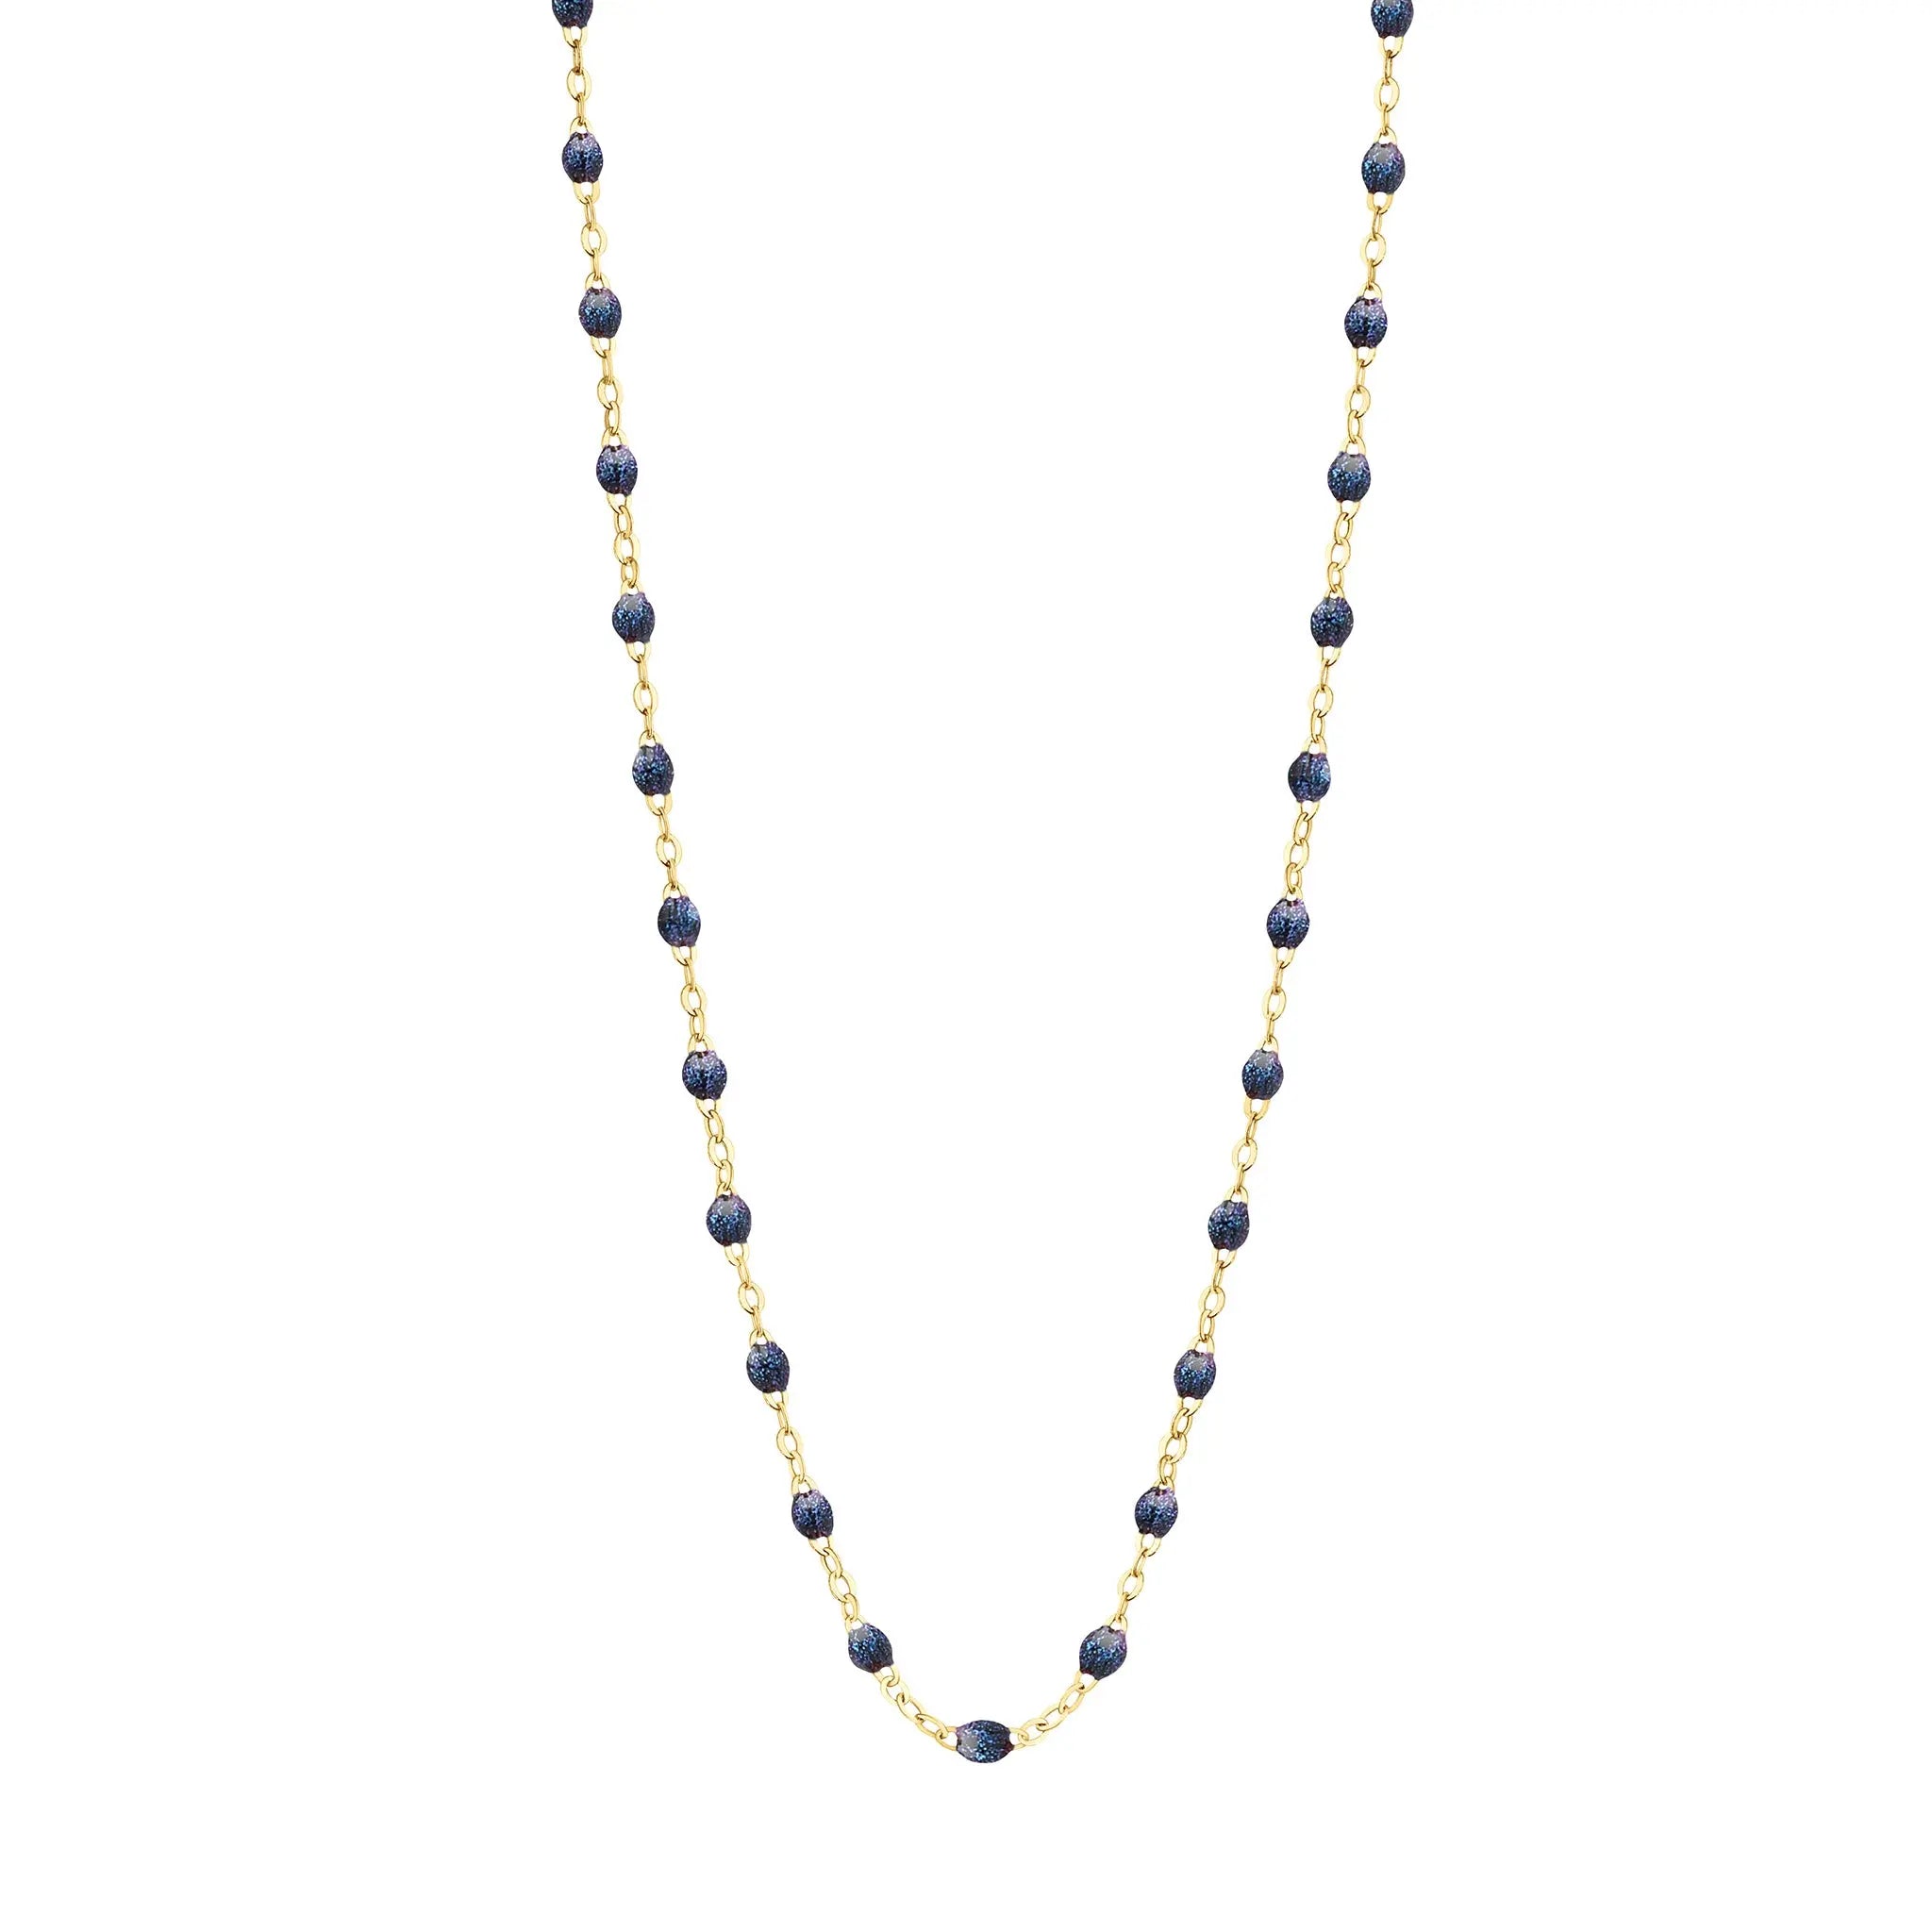 Stack you necklace layers with this versatile beaded chain! The Classic Gigi Necklace by gigi CLOZEAU features 18 carat yellow gold, and striking Midnight resin jewels for an everyday effortless appearance. Handcrafted in 18k yellow gold. The beads measure 1.50mm in diameter and is finished with a spring ring clasp. The length is 19.7 inches.